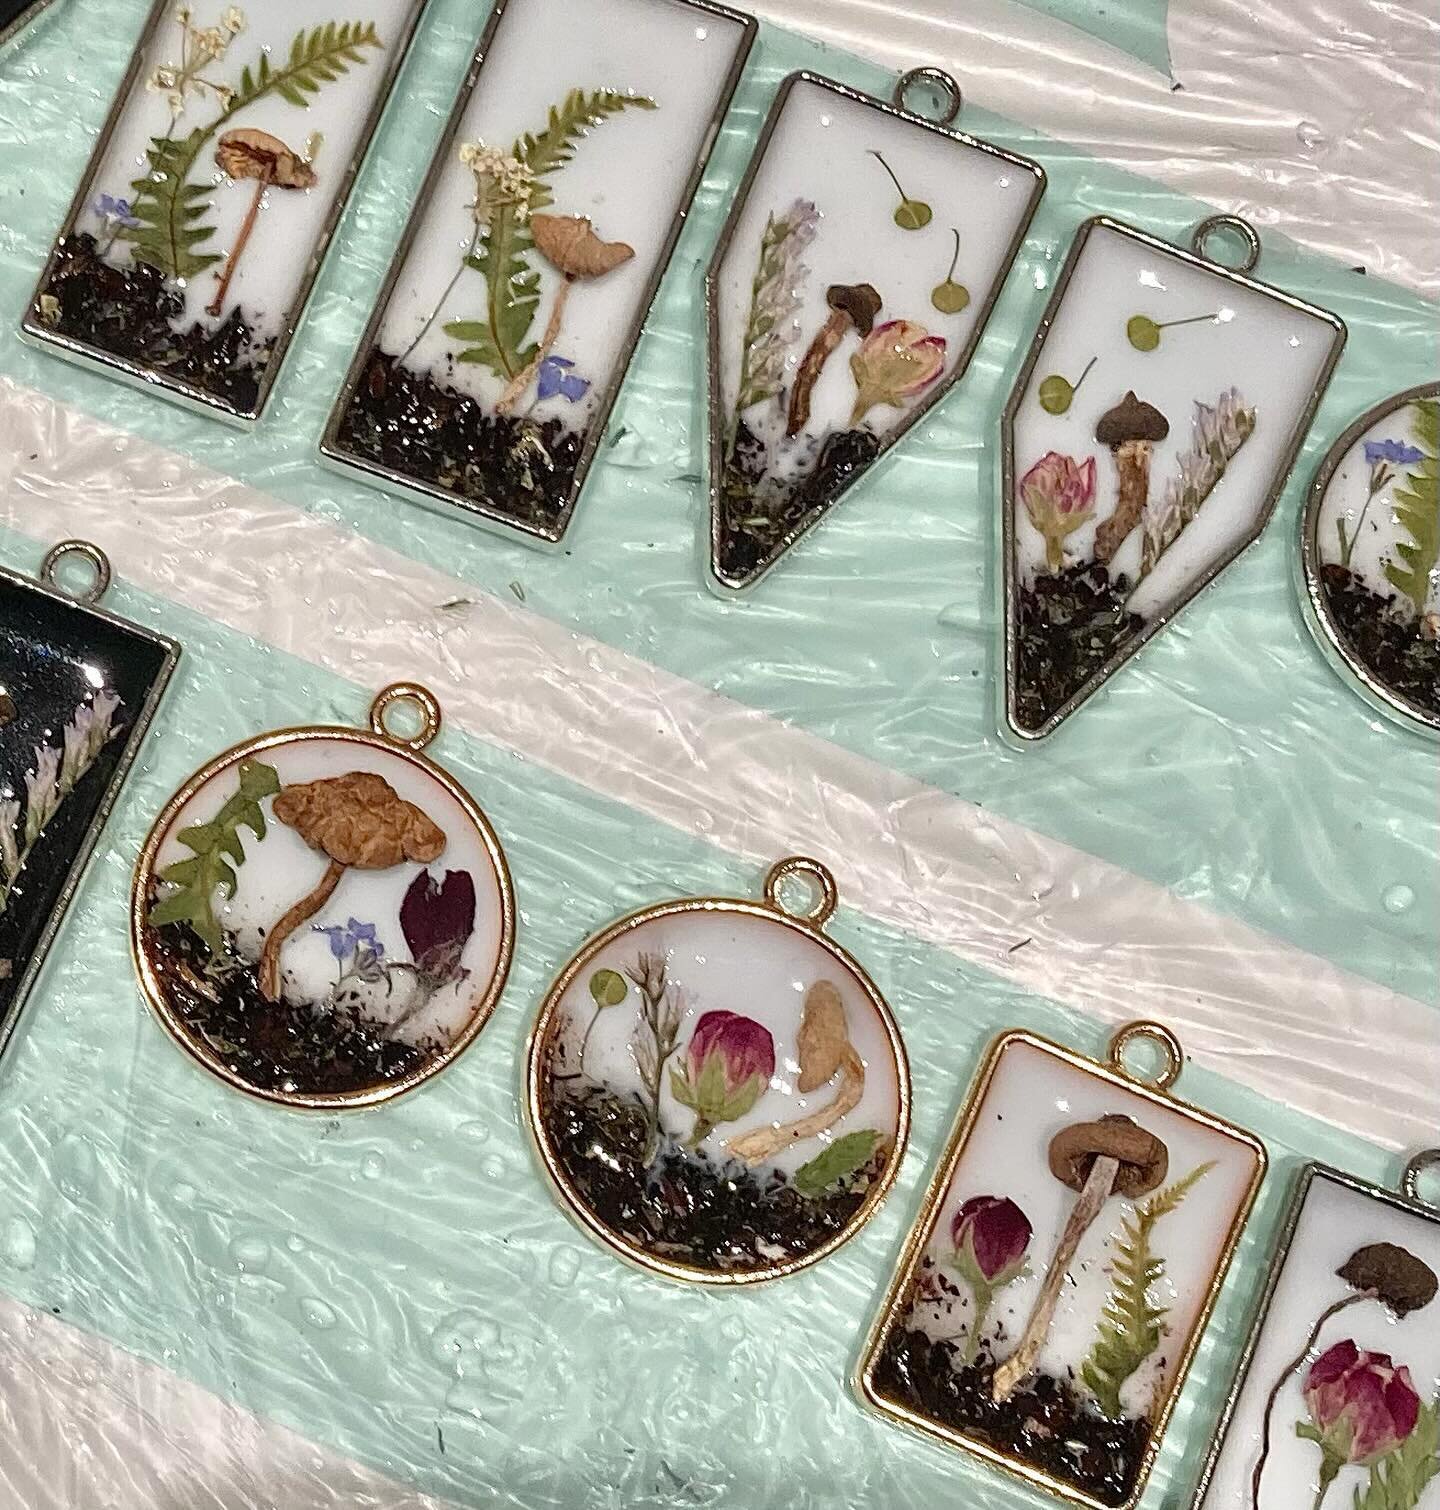 NEW WORK IN PROCESS&mdash;DM me to preorder!! Necklaces, earrings, and rings, oh my! 🤗

I&rsquo;m pretty much out of tiny mushrooms 😭 so this&rsquo;ll be it for mushroom jewelry until you&rsquo;ll find me rolling around in the mud after a warm summ